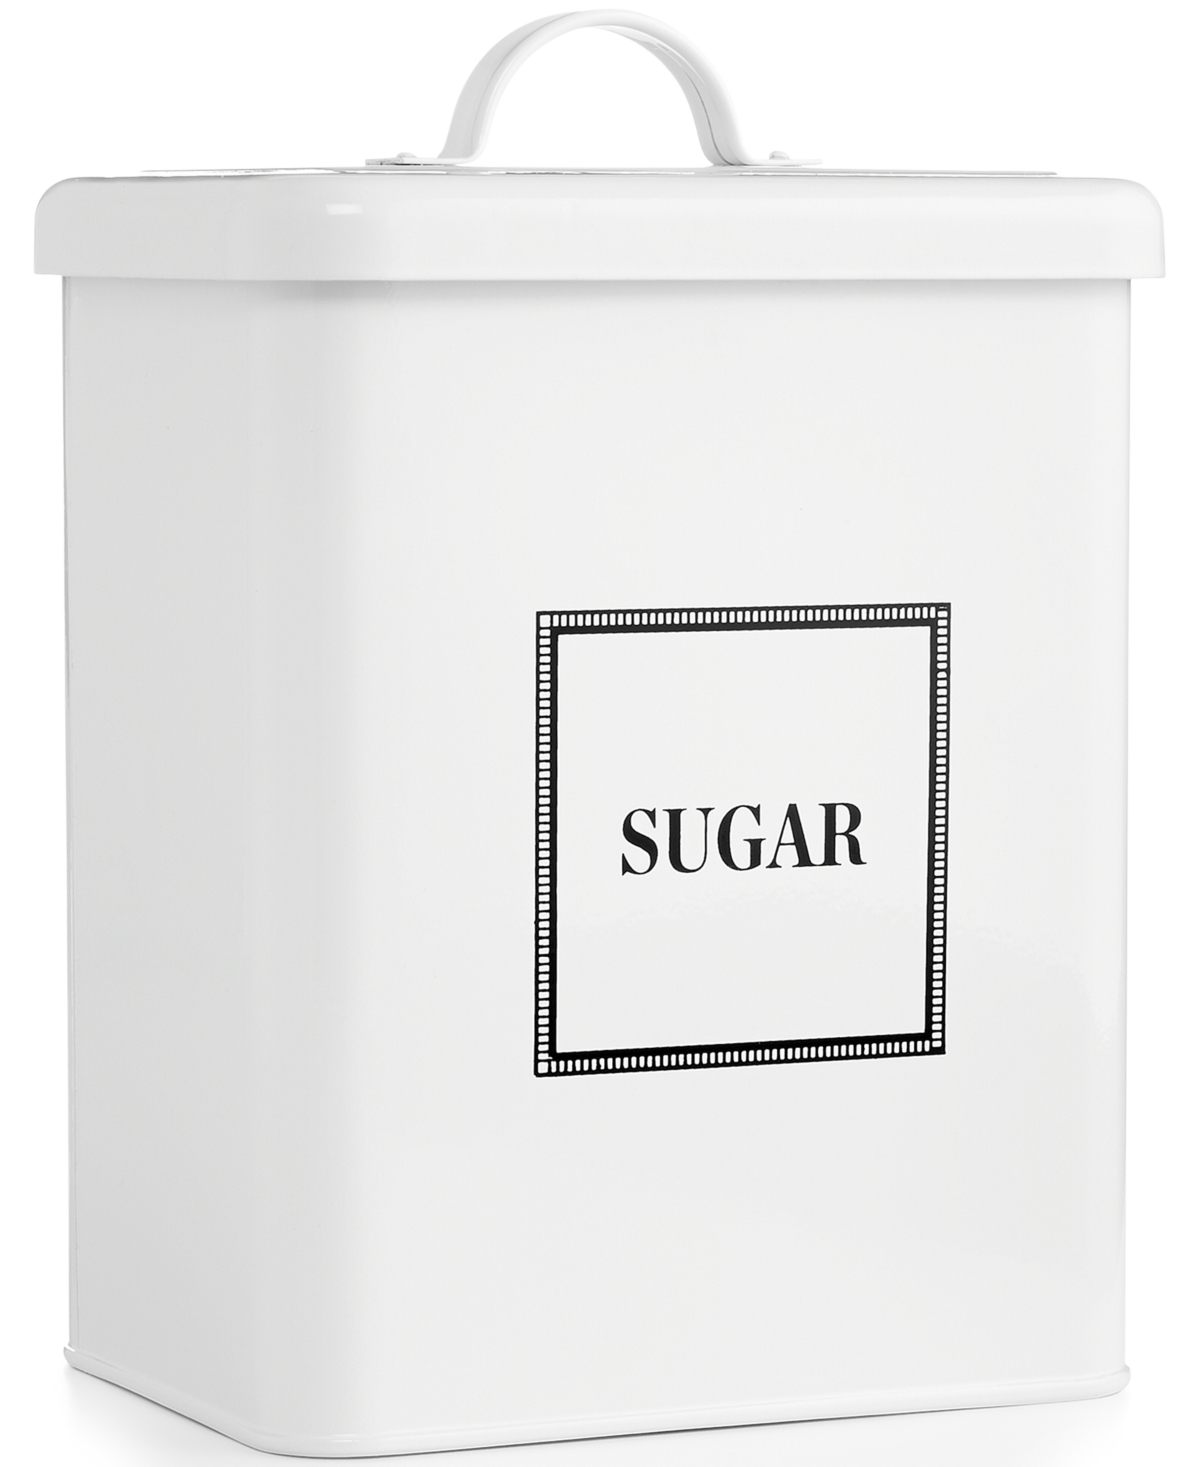 Martha Stewart Collection 16-Cup Vintage-Inspired Food Storage Canister, Created for Macy's